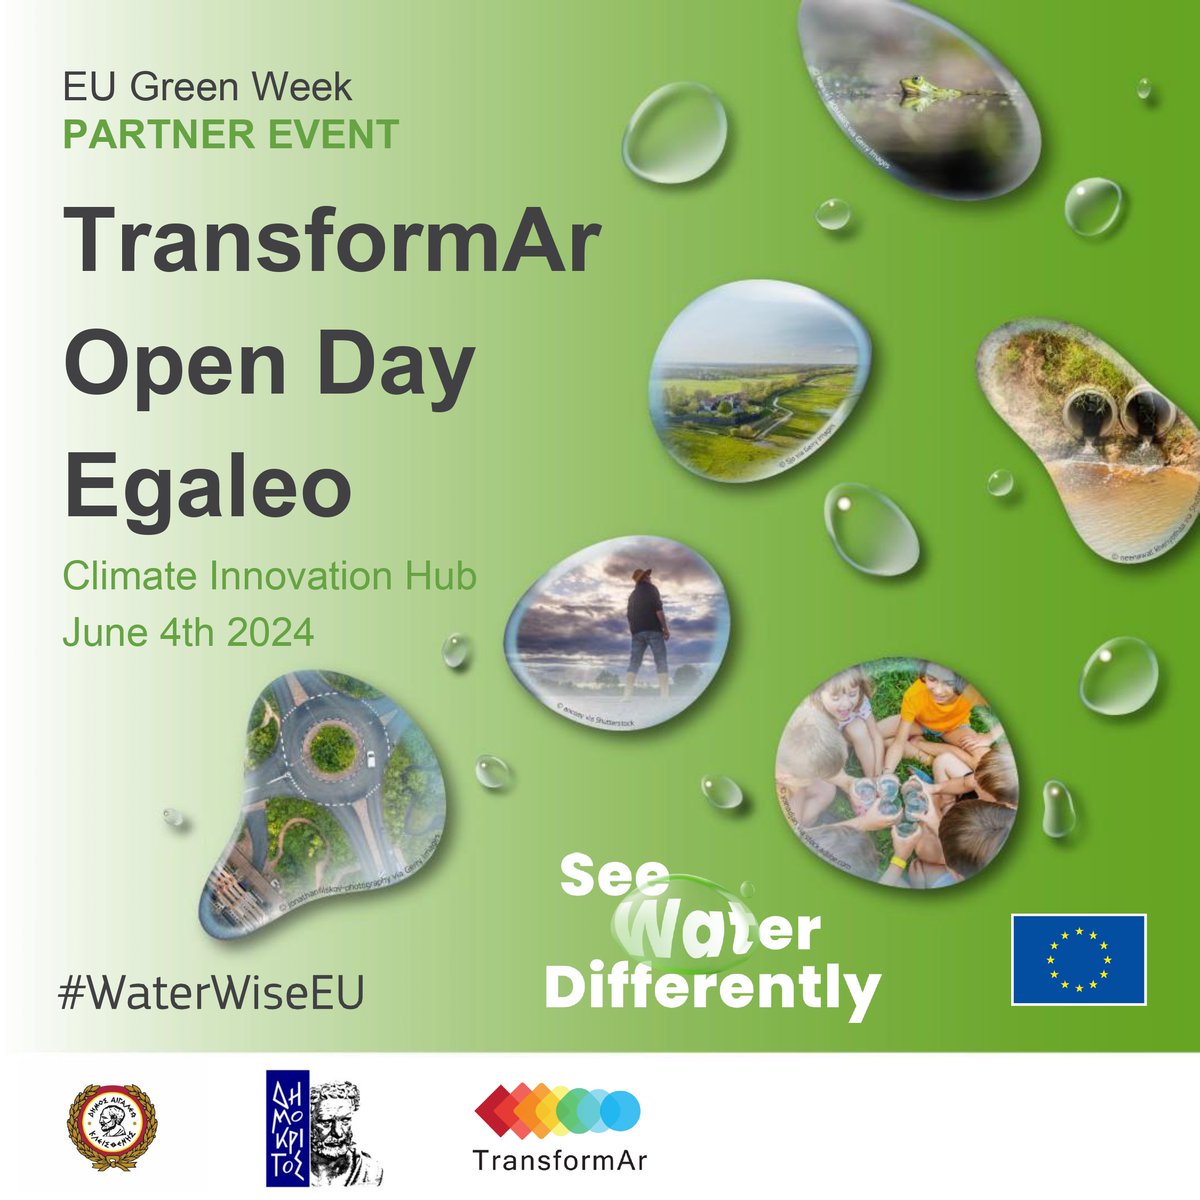 ⏰ Our first Open Day in the city of Egaleo is next week! Egaleo is the first TransformAr Demonstrator to organize its Open Day next Tuesday ! 💡More info on its #EUGreenWeek partner event page: green-week.event.europa.eu/partner-events… #WaterWiseEU